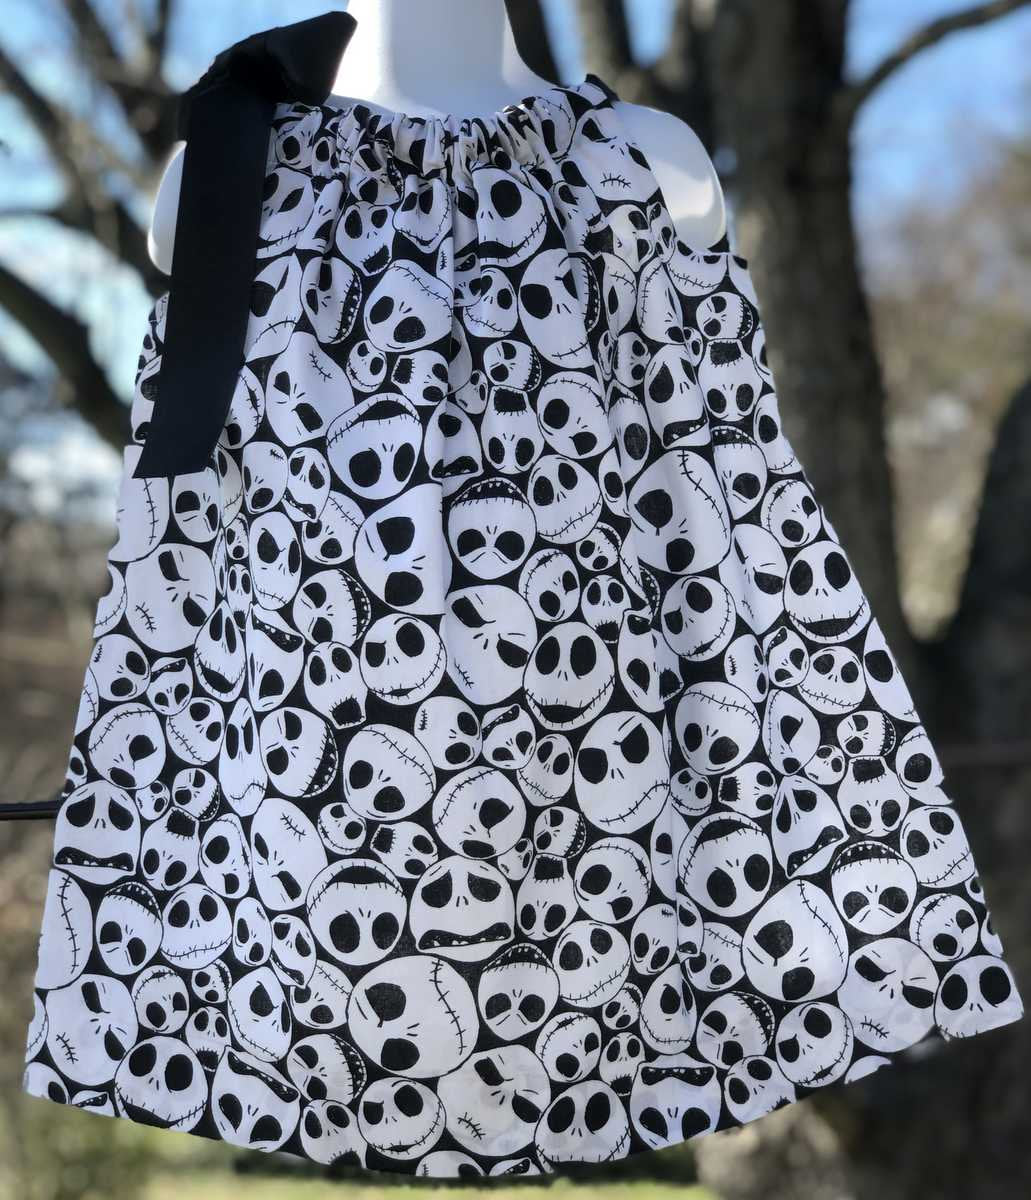 Nightmare Before Christmas Dress Packed Jack Faces Black White Gothic Birthday Party Girl Pillowcase Dress 12m 2T 3T 4T 5 6 7 8 10 12 14